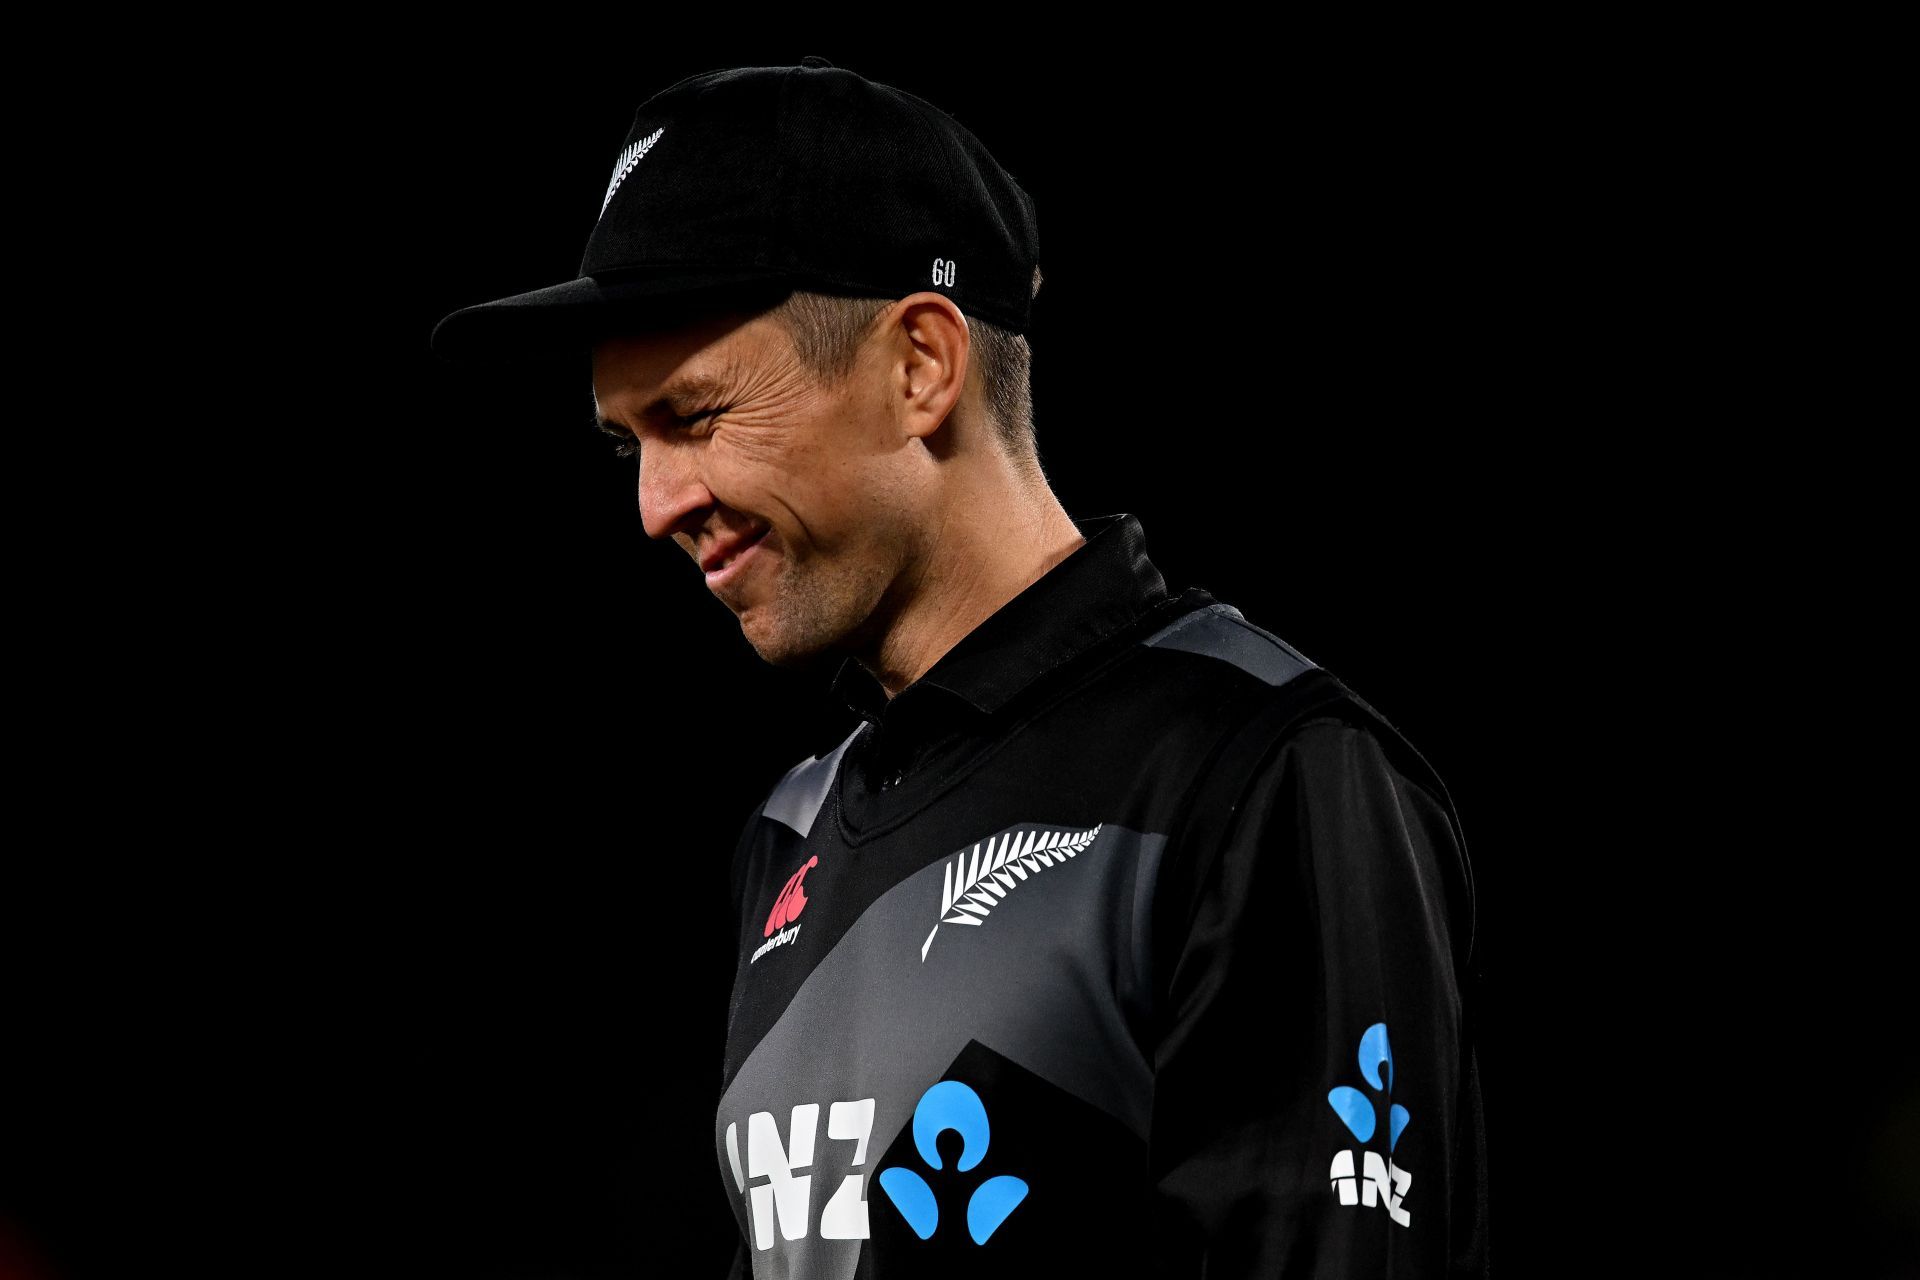 Trent Boult. (Image Credits: Getty)